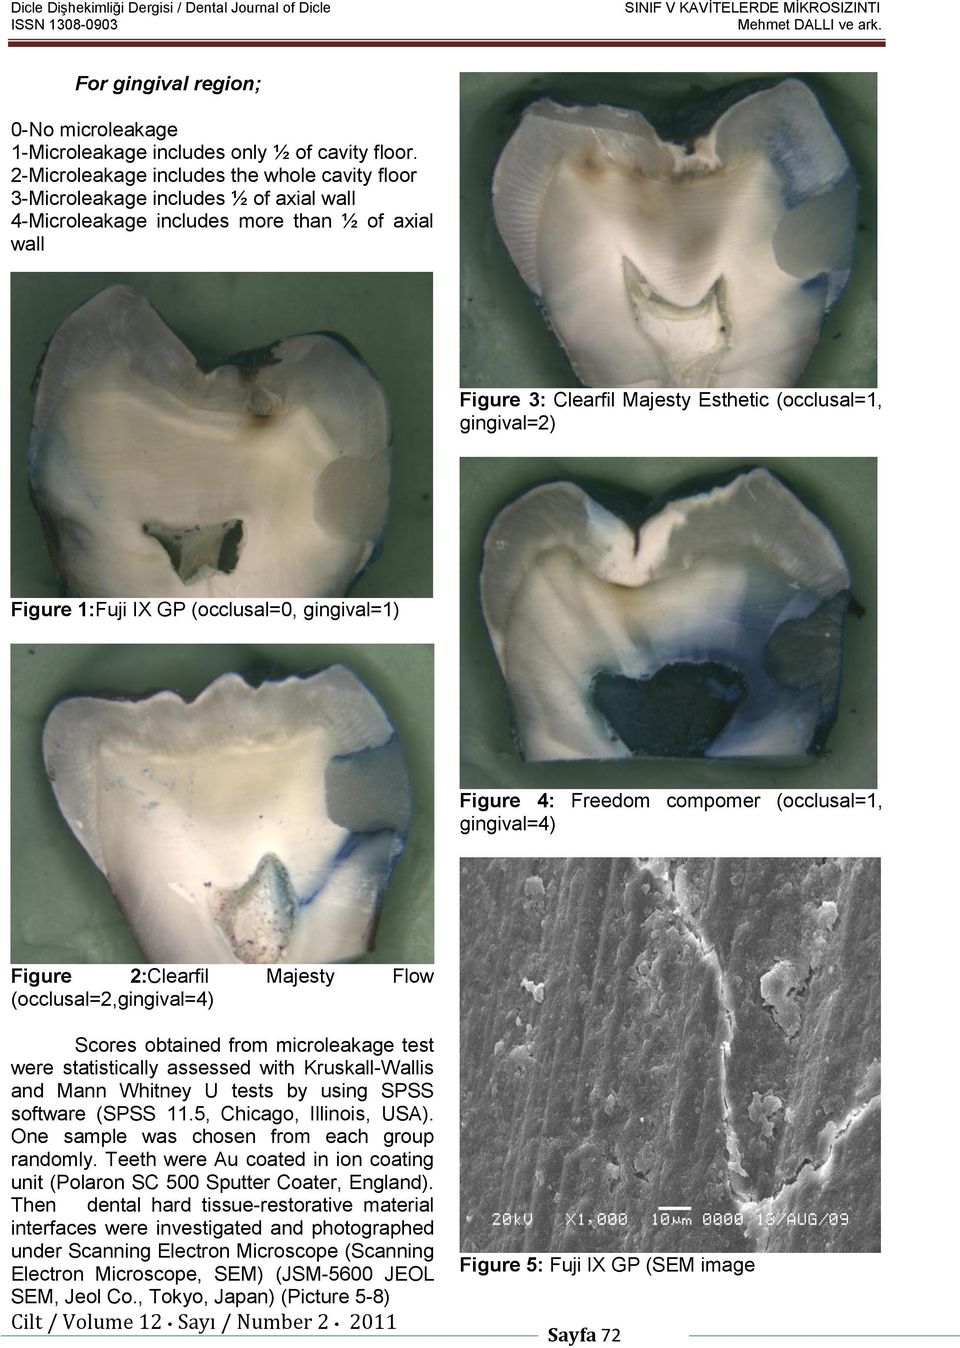 Figure 1:Fuji IX GP (occlusal=0, gingival=1) Figure 4: Freedom compomer (occlusal=1, gingival=4) Figure 2:Clearfil Majesty Flow (occlusal=2,gingival=4) Scores obtained from microleakage test were